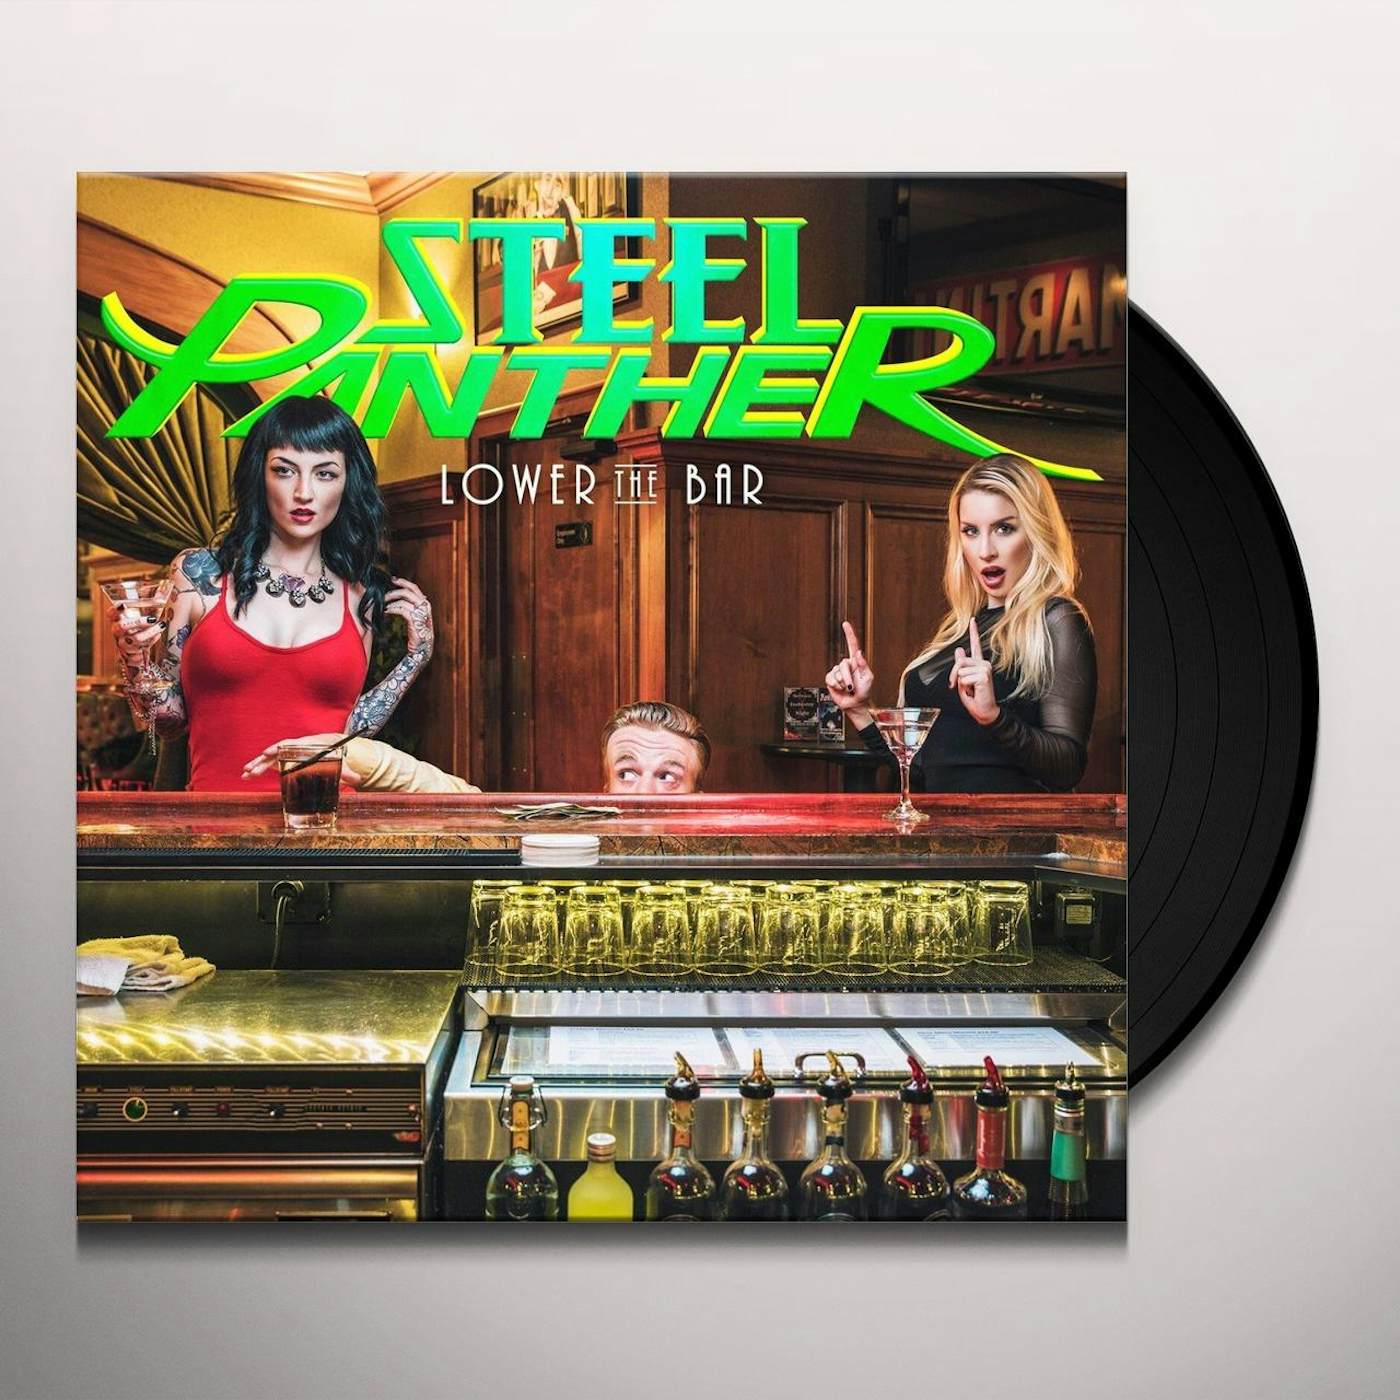 Steel Panther Lower The Bar Vinyl Record